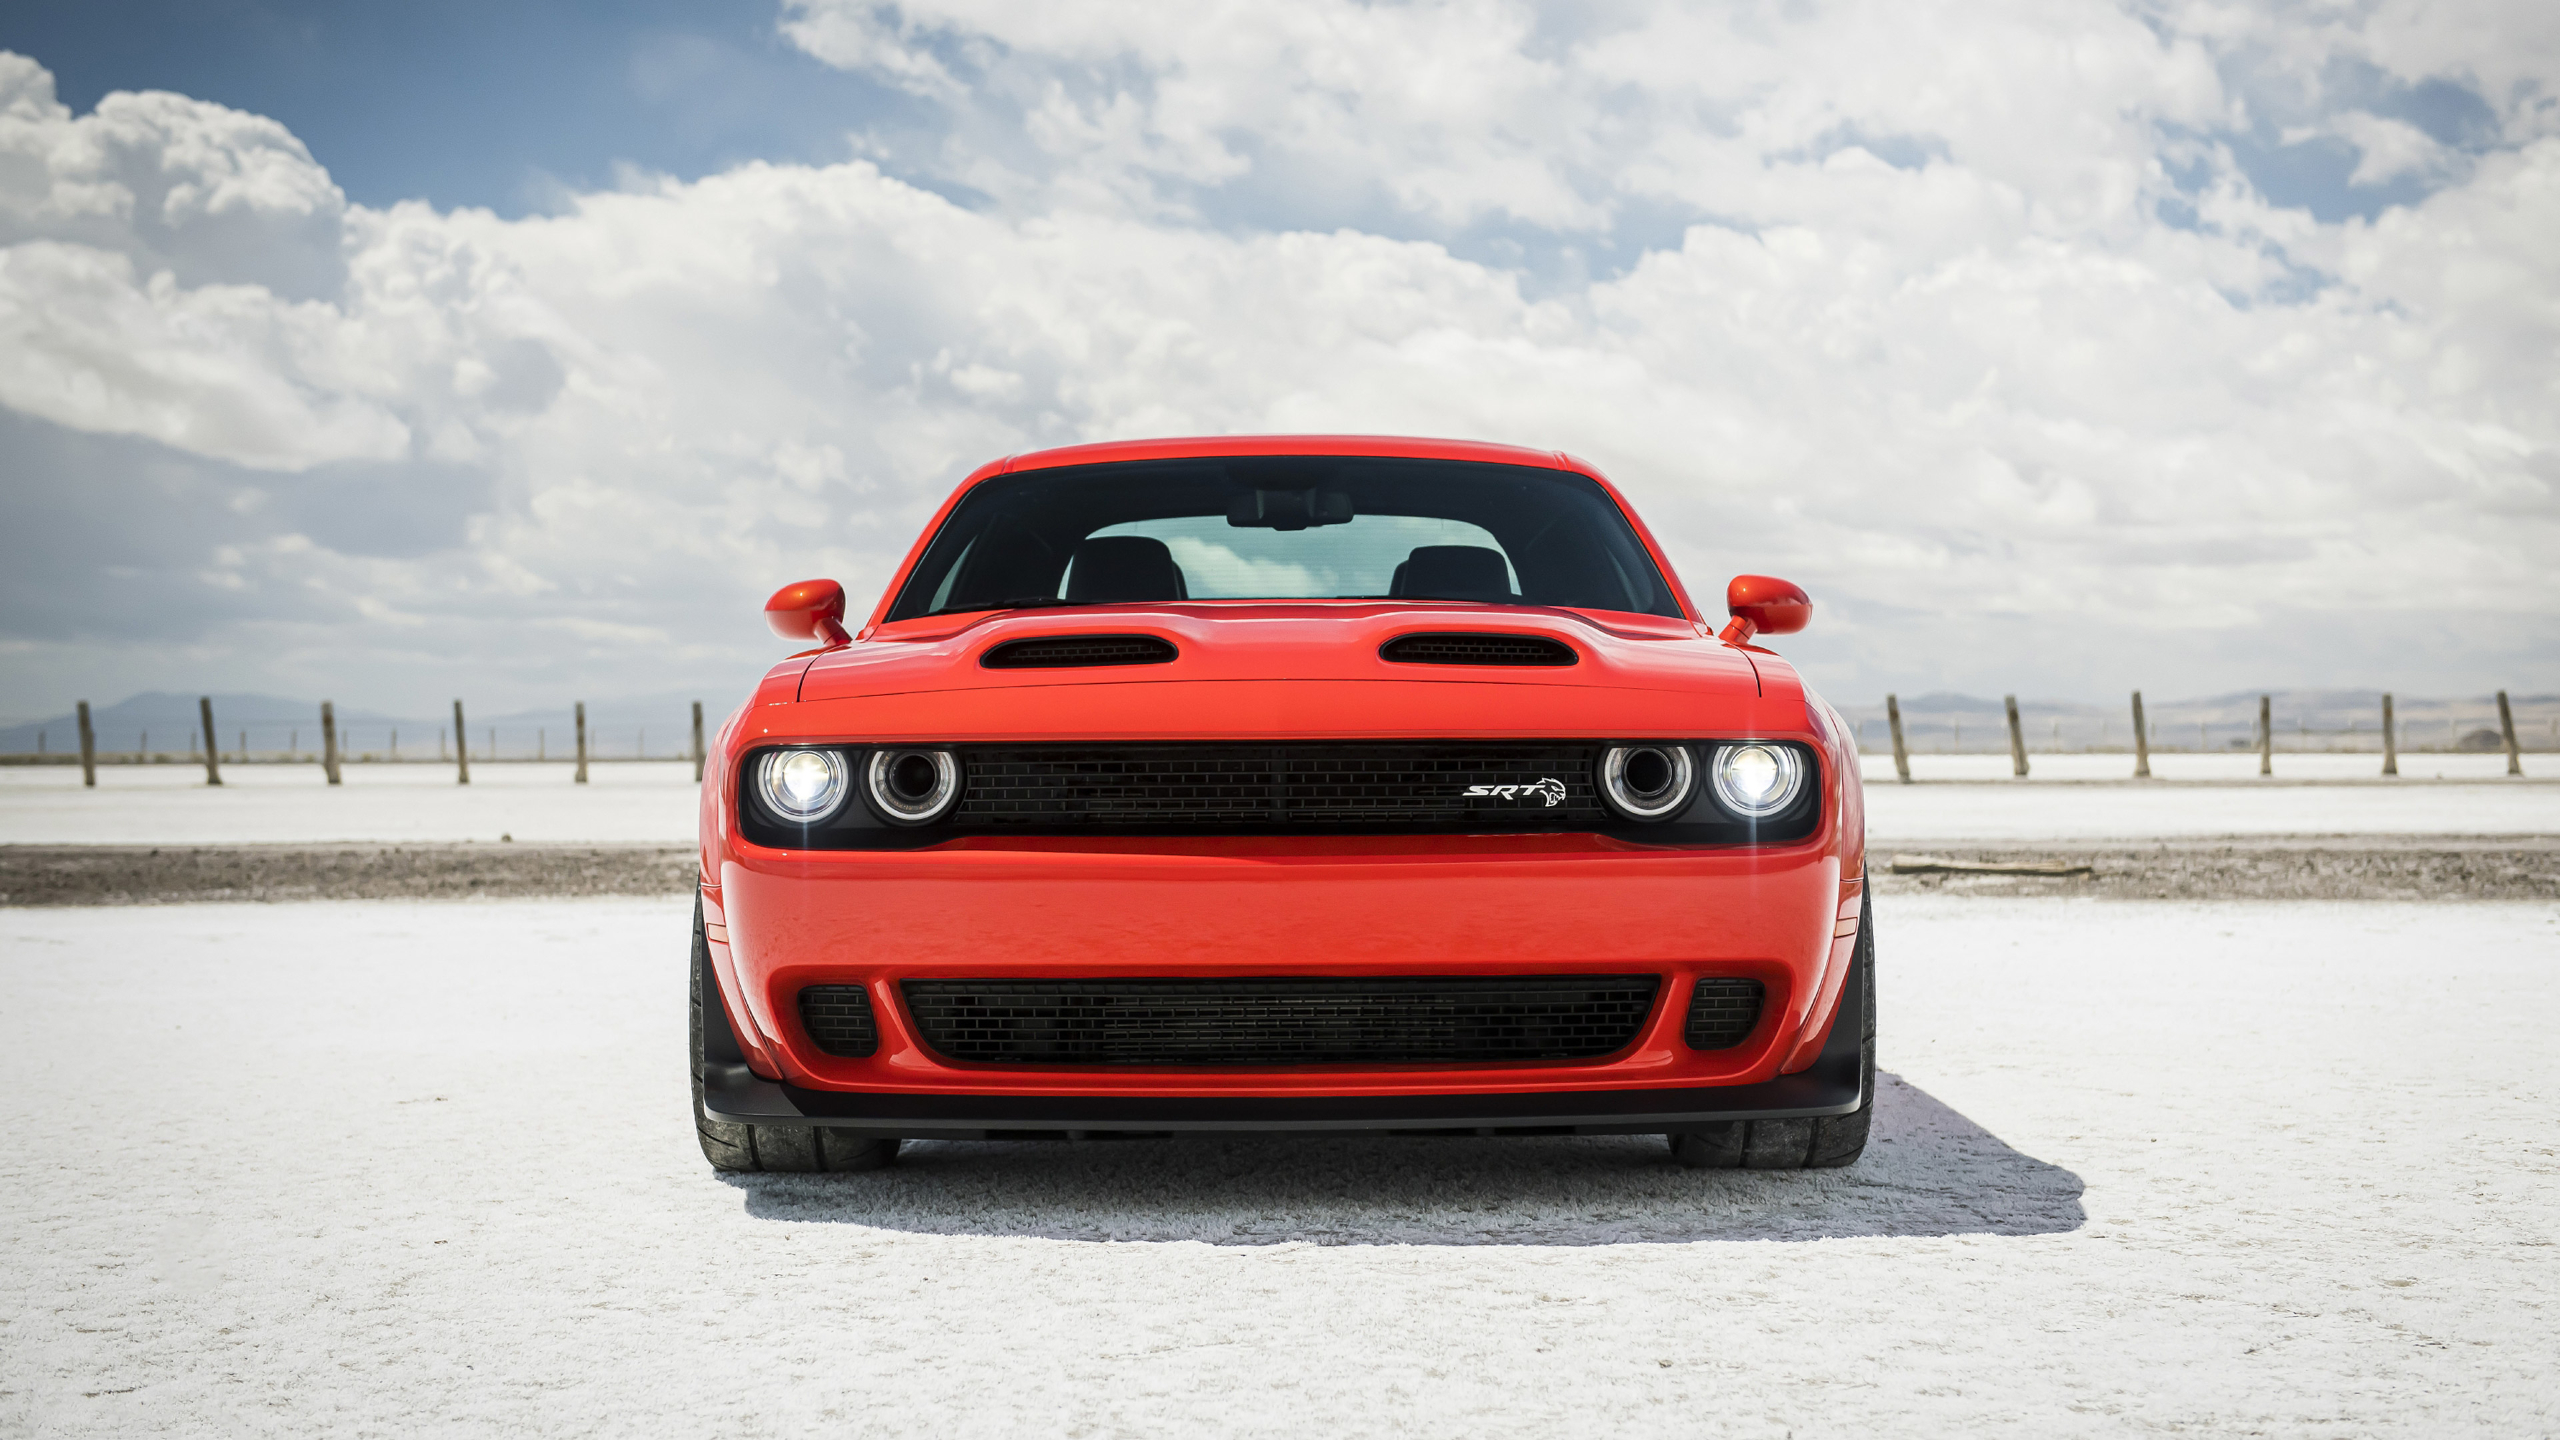 General 2560x1440 Dodge Challenger hellcat muscle cars car vehicle red cars Dodge American cars Stellantis